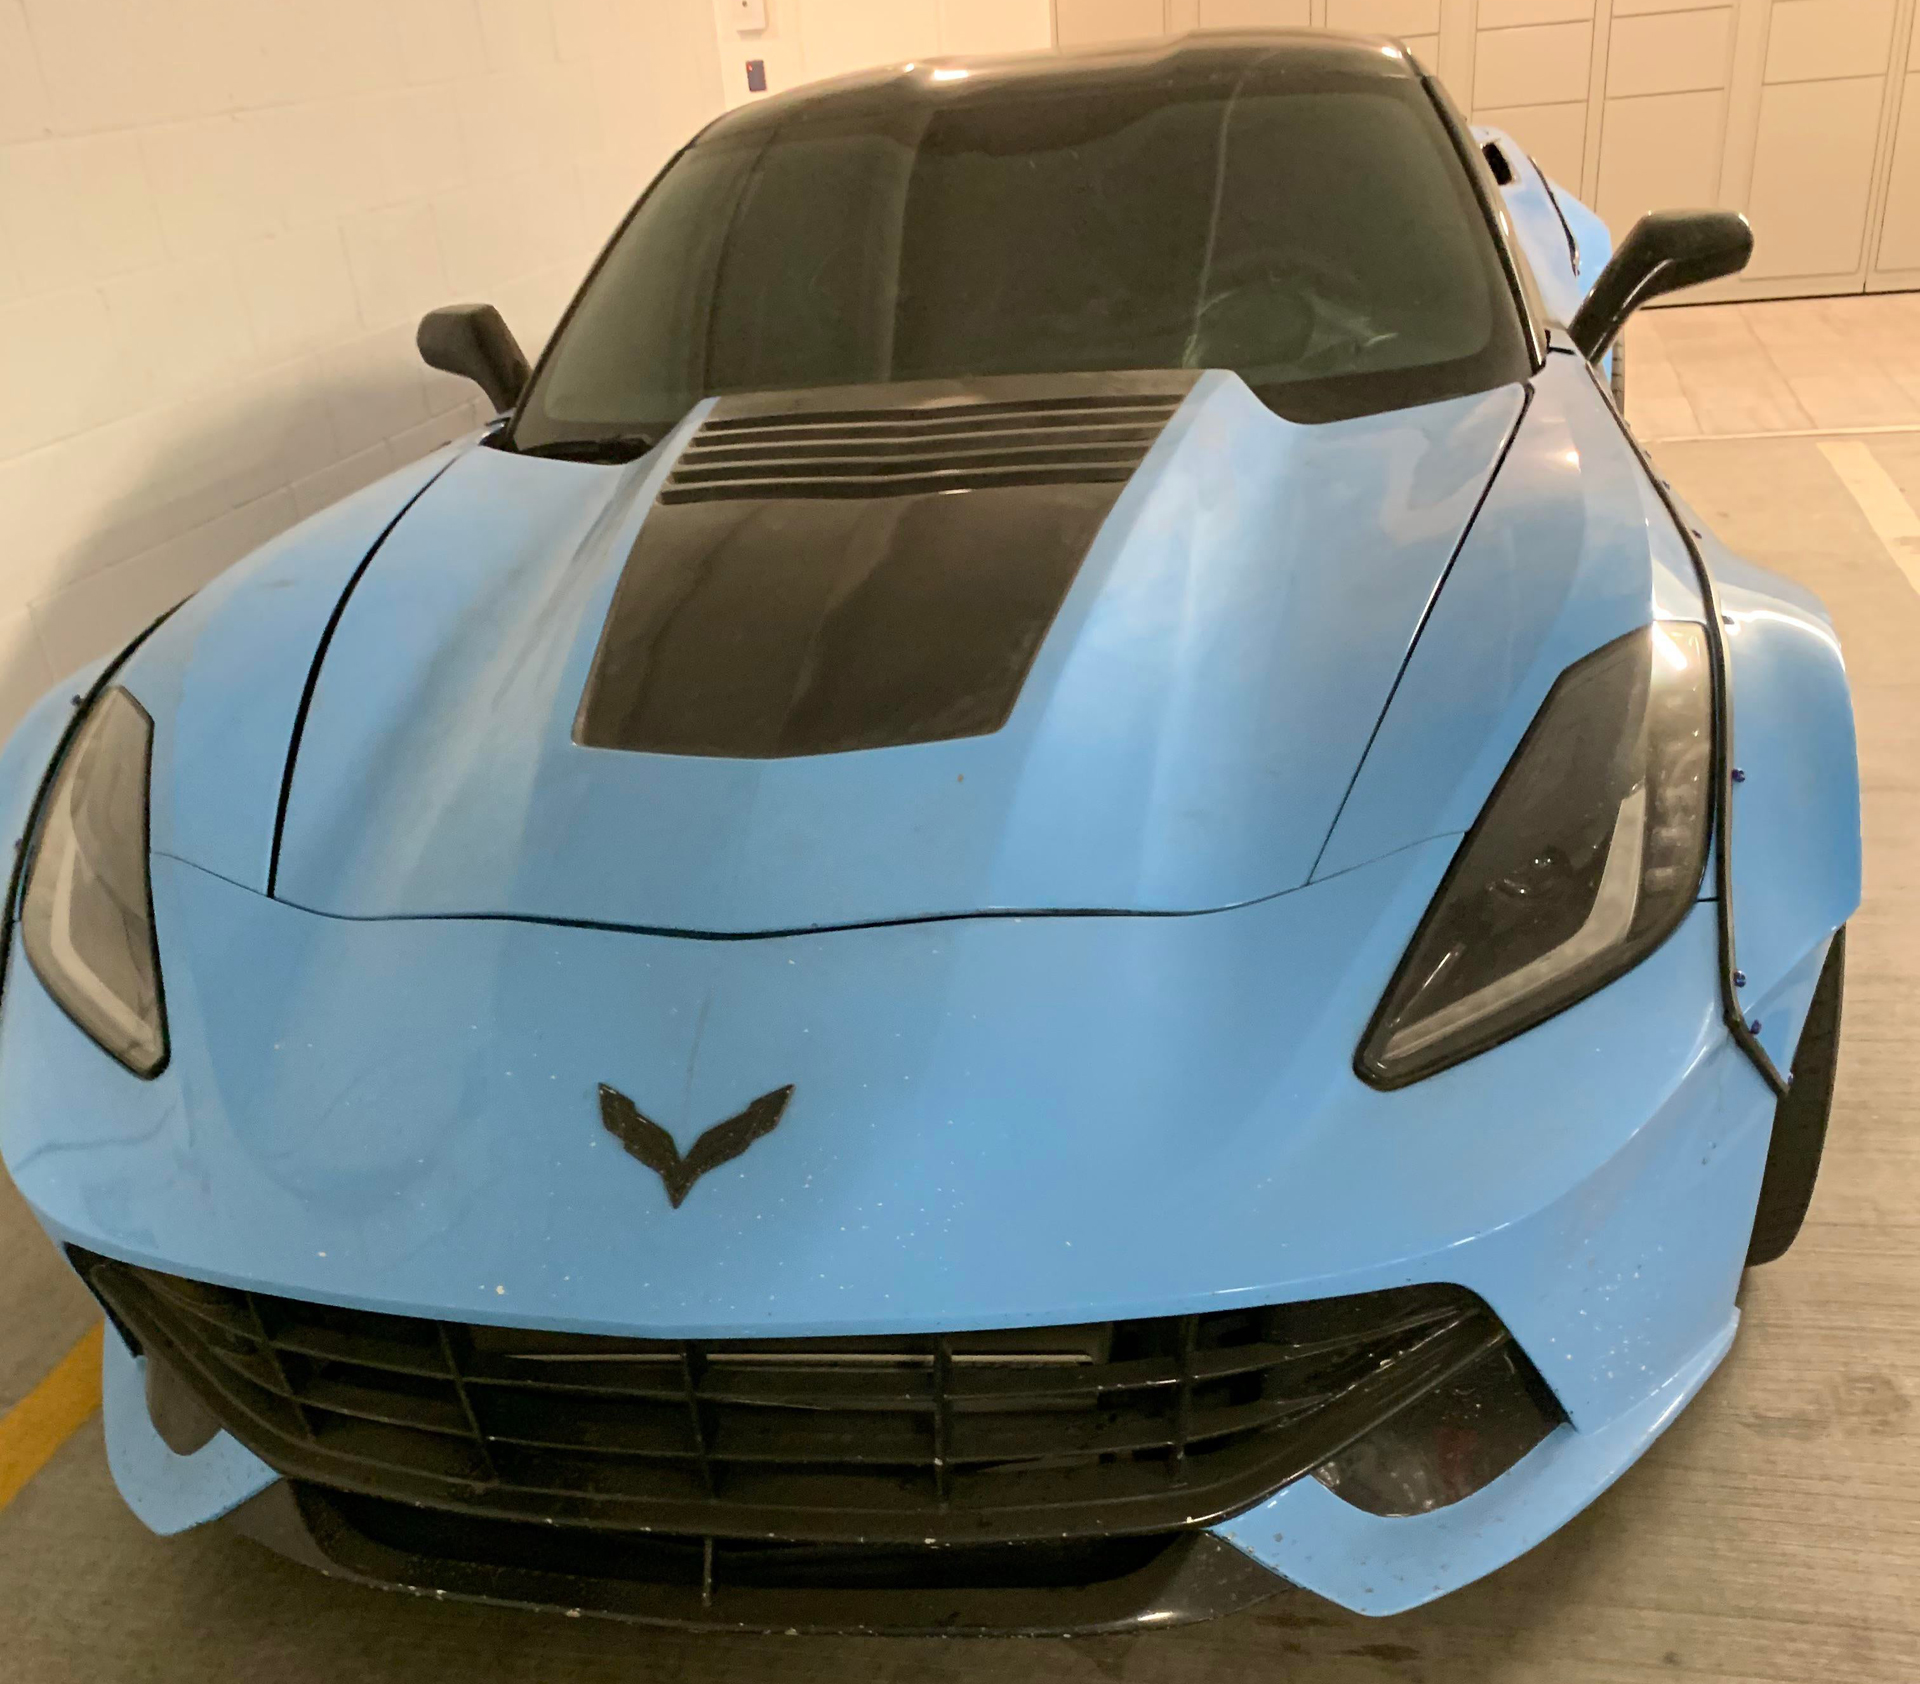 Nailed It Corvette Z06 Puts On Weird Widebody Kit Ferrari F12 Like Front End Carscoops